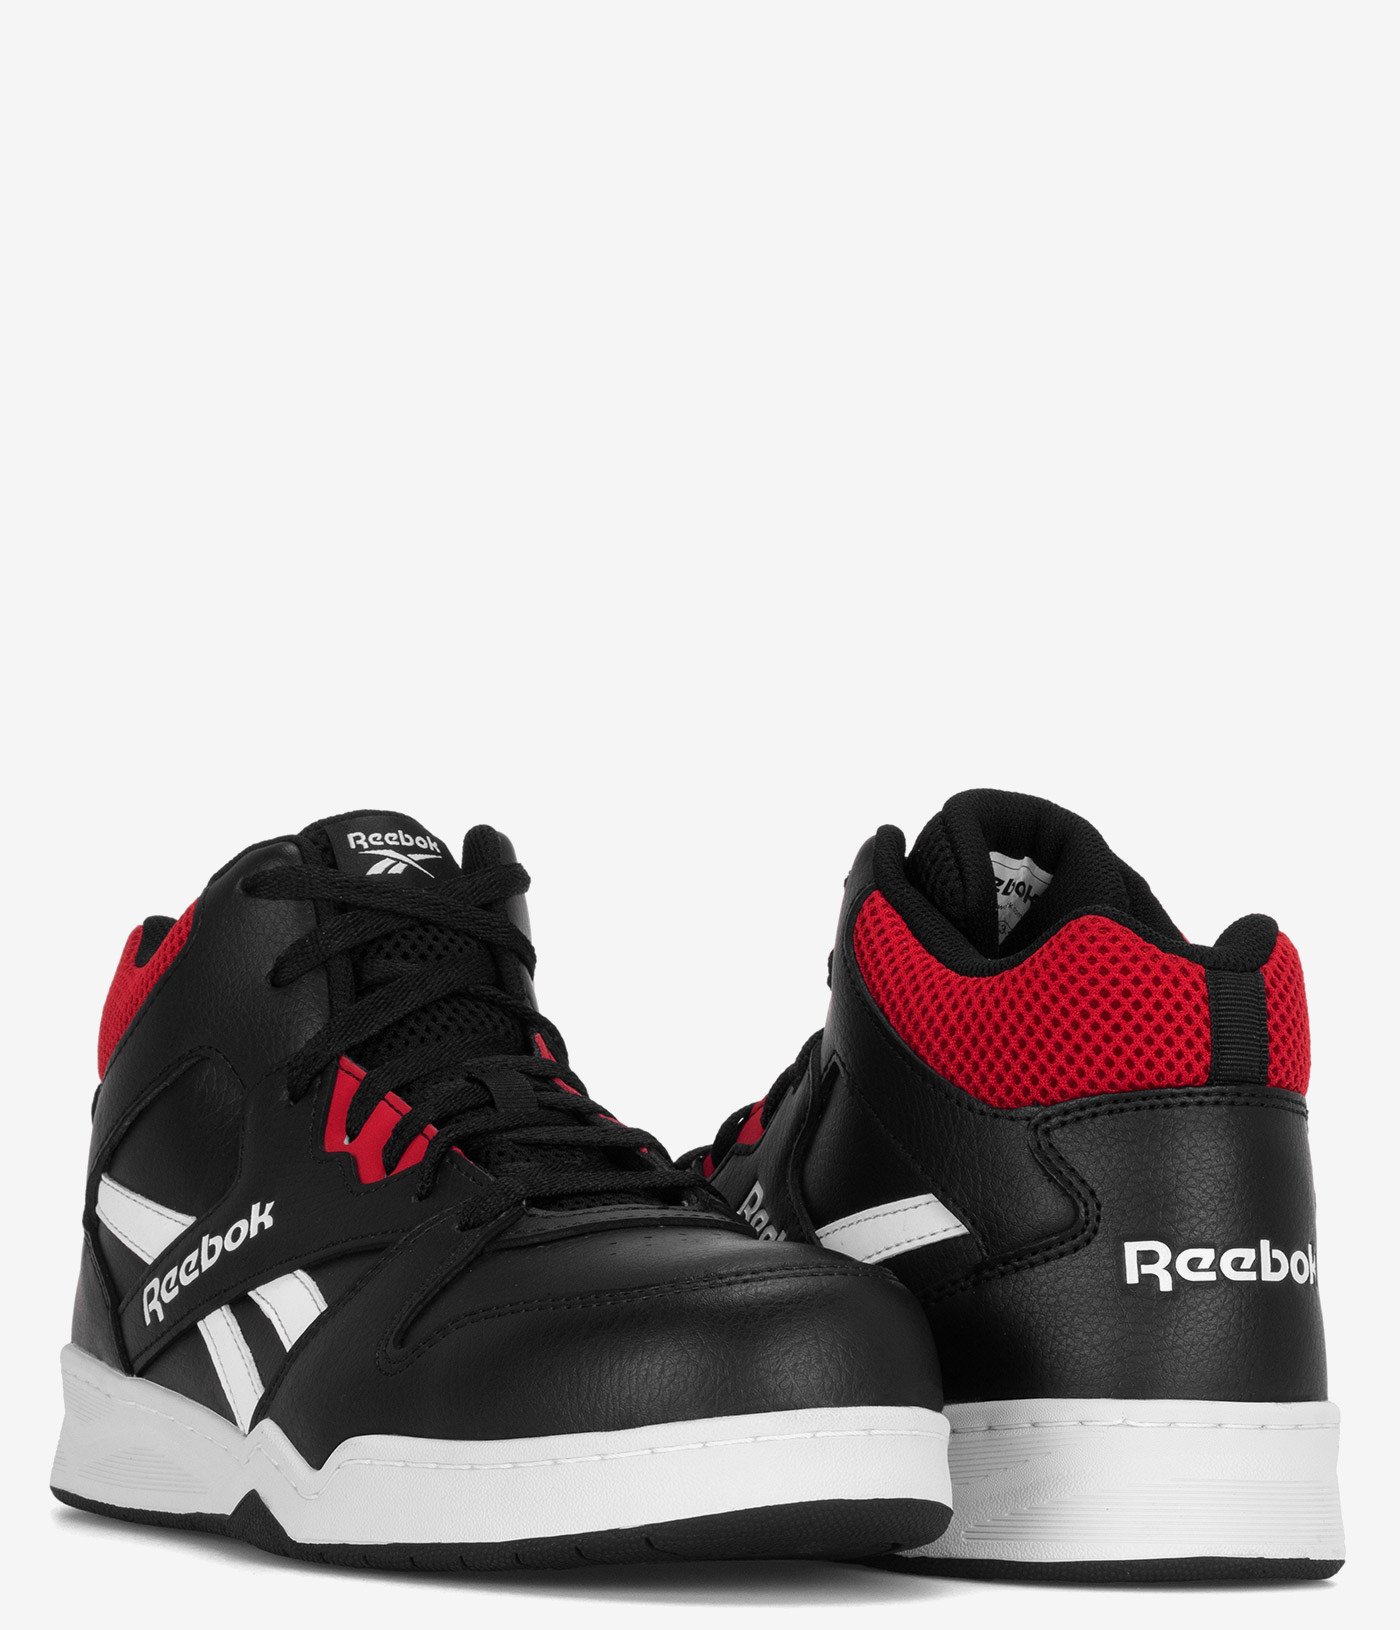 Reebok BB4500 Composite Safety Toe EH High Top Sneaker 